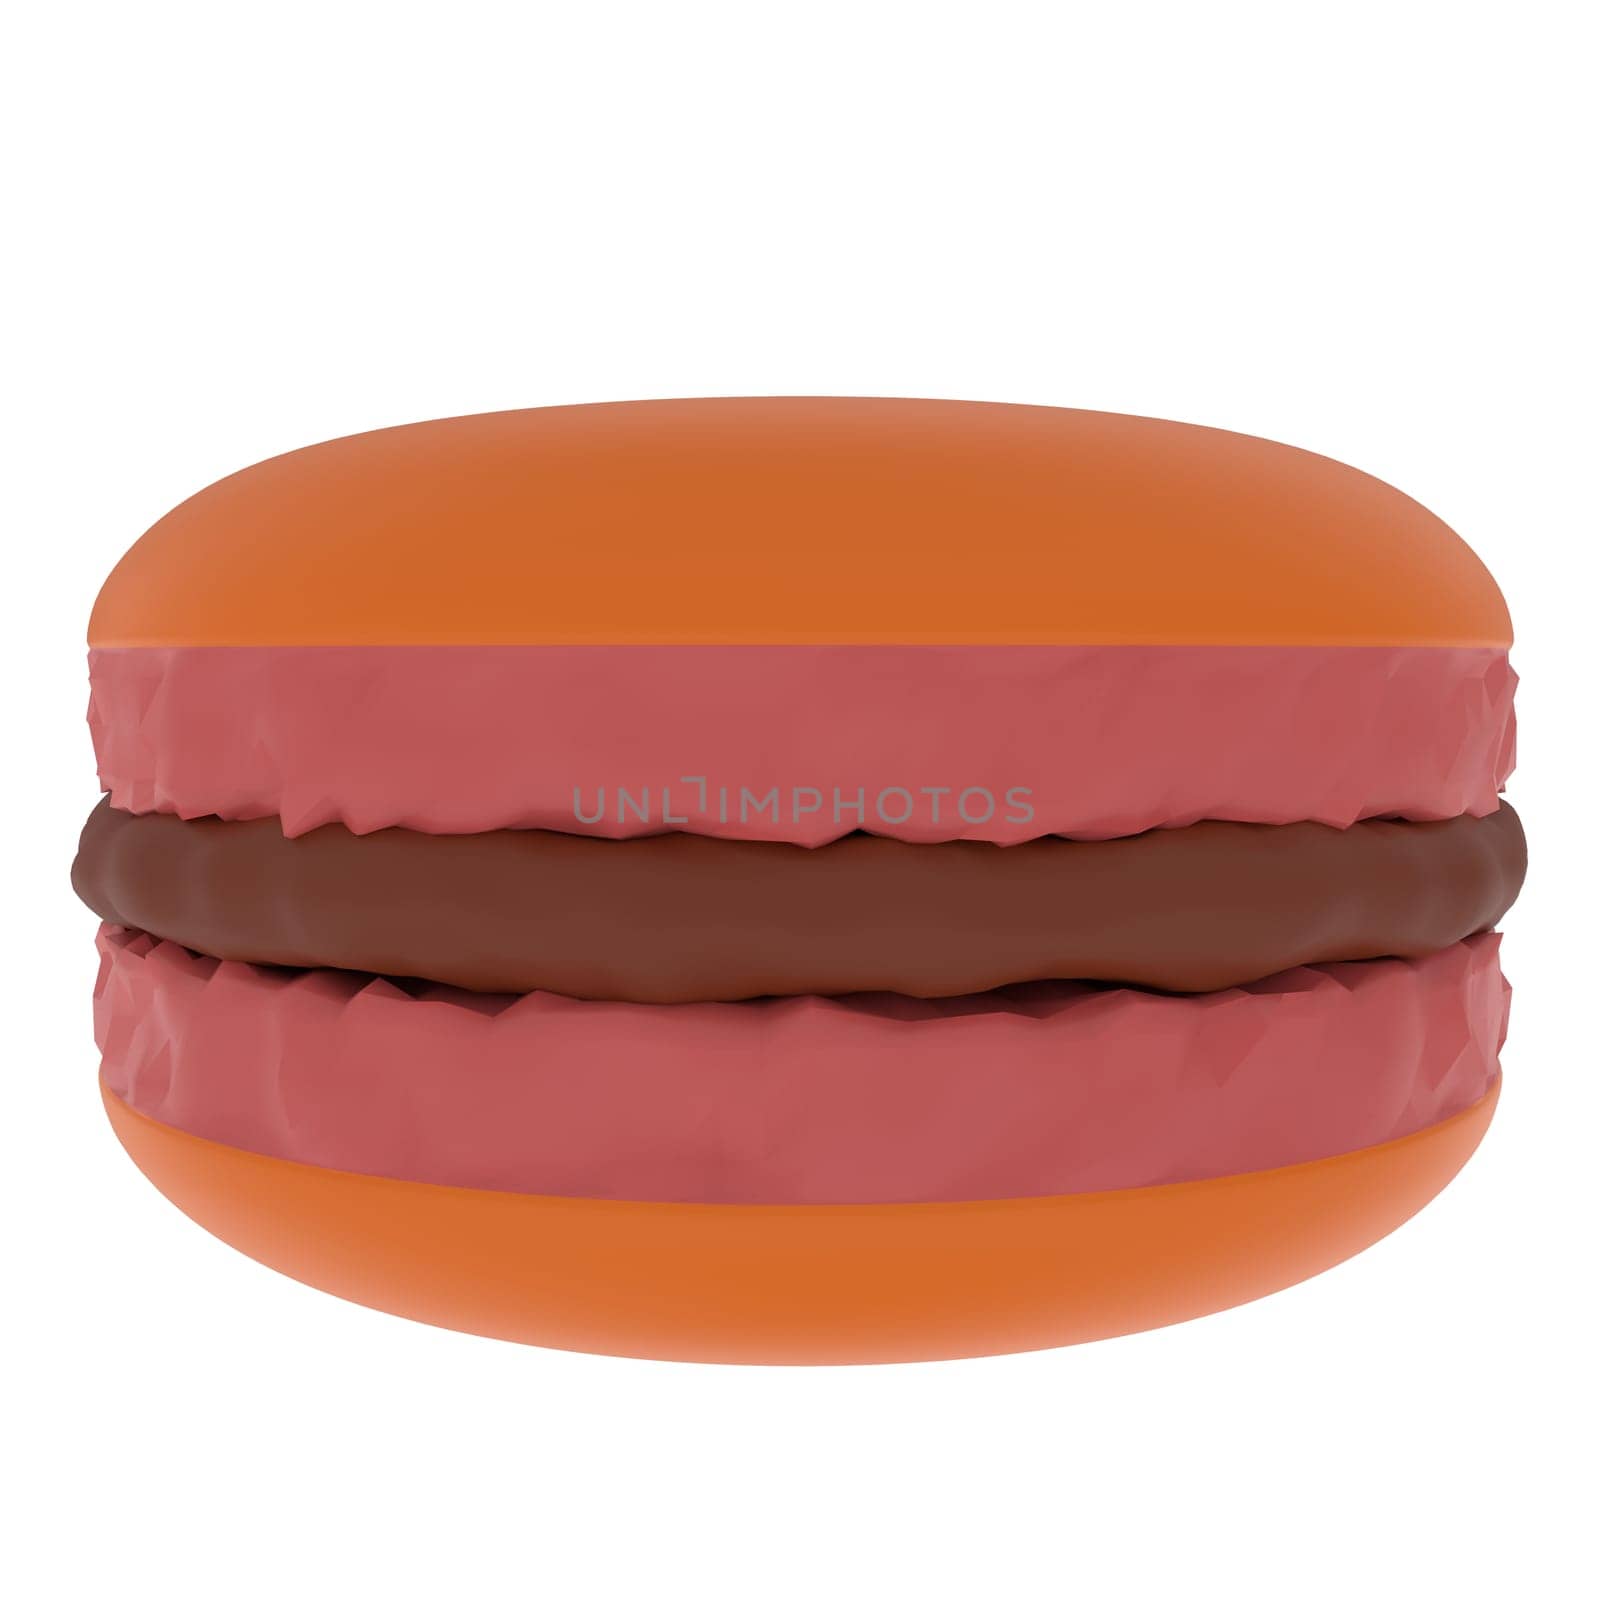 Macaron isolated on white background. High quality 3d illustration